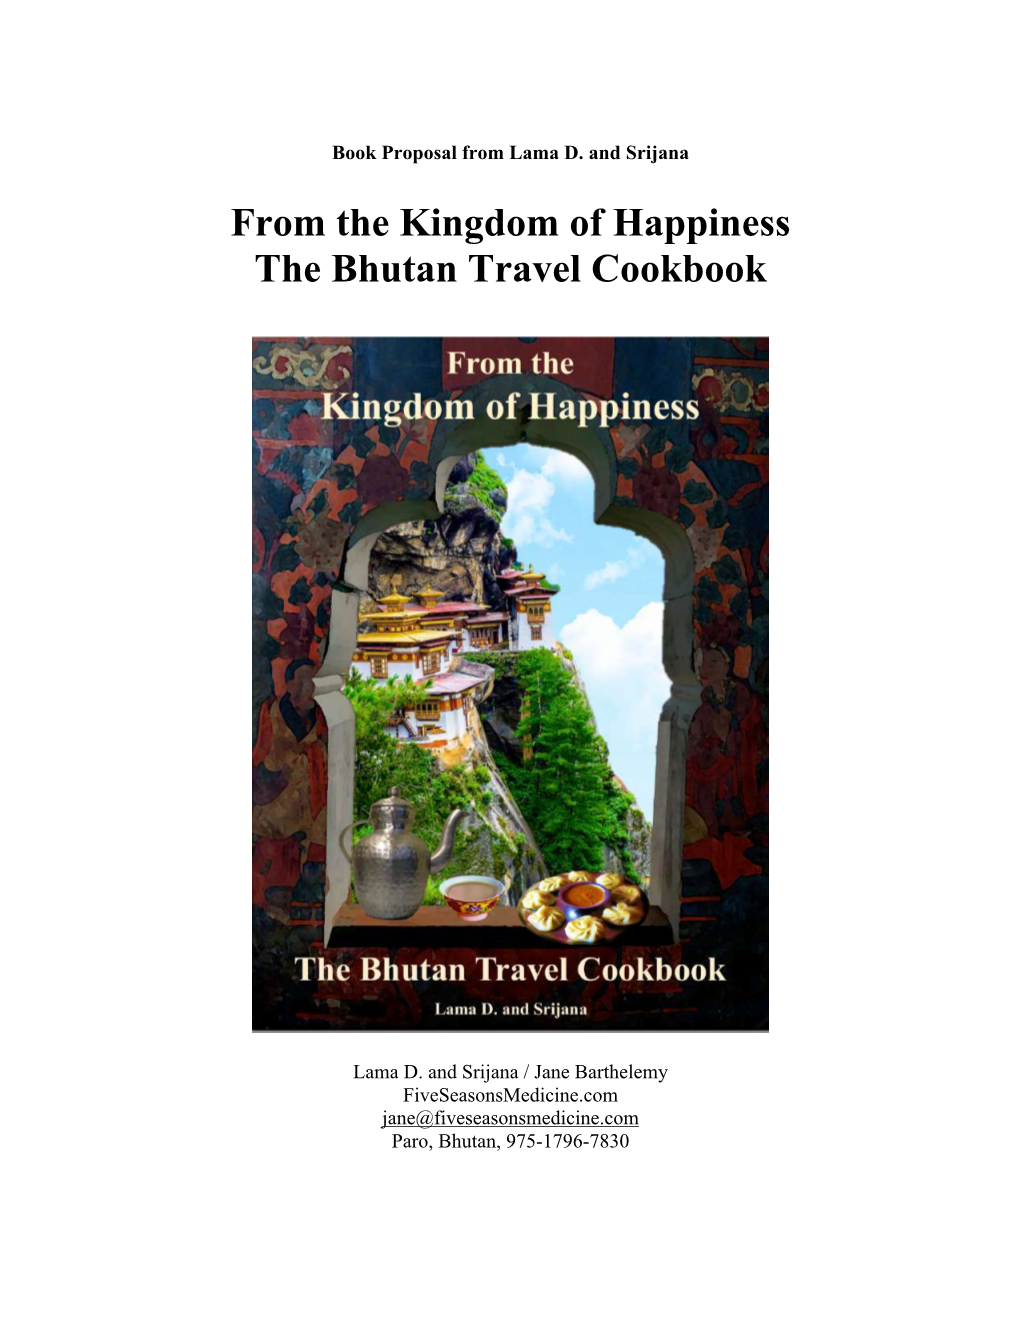 From the Kingdom of Happiness the Bhutan Travel Cookbook